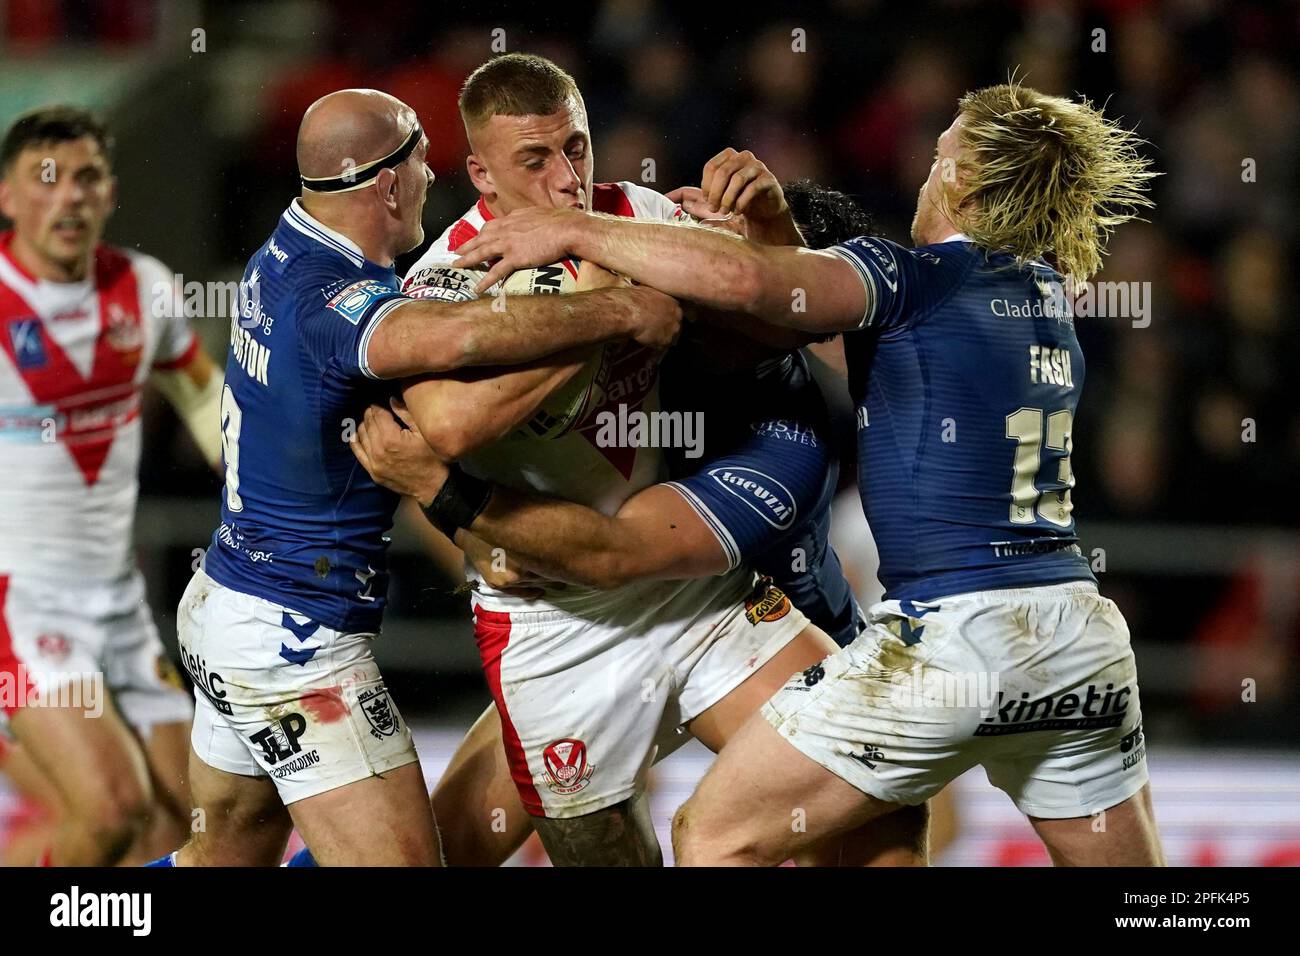 St Helens’ Joey Lussick (centre) is tackled by Hull FC’s Danny Houghton and Hull FC’s Brad Fash during the Betfred Super League match at the Totally Wicked Stadium, St Helens. Picture date: Friday March 17, 2023. Stock Photo